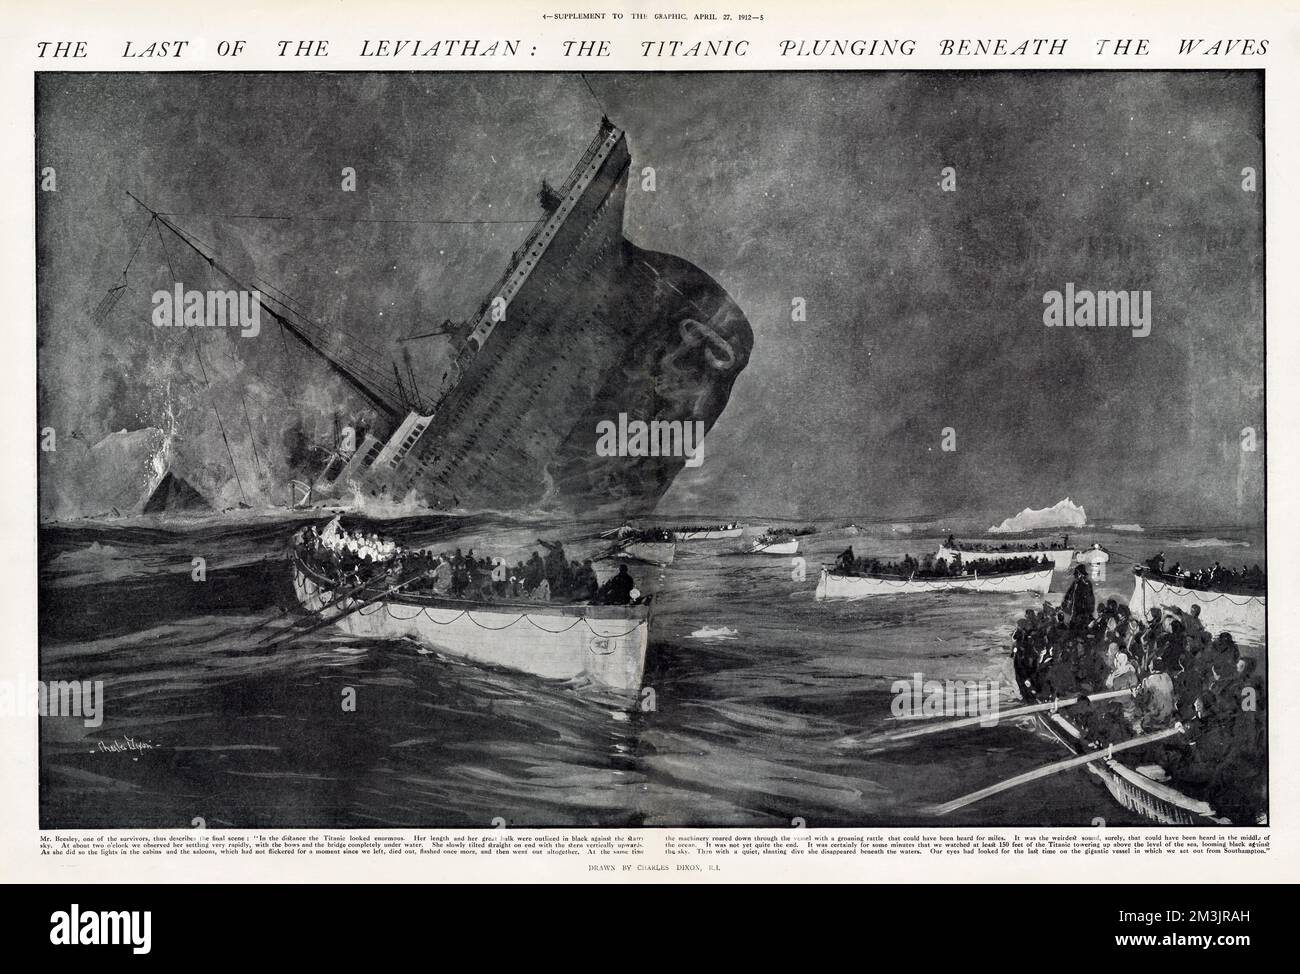 The last of the Leviathan: the Titanic plunging beneath the waves. Mr Beesley, one of the survivors, described the final scene: 'in the distance the Titanic looked enormous...she slowly tilted straight on end with the stern vertically upwards. As she did so the lights in the cabins and the saloons, which had not flickered for a moment died out, flashed once more, and then went out altogether.' Stock Photo